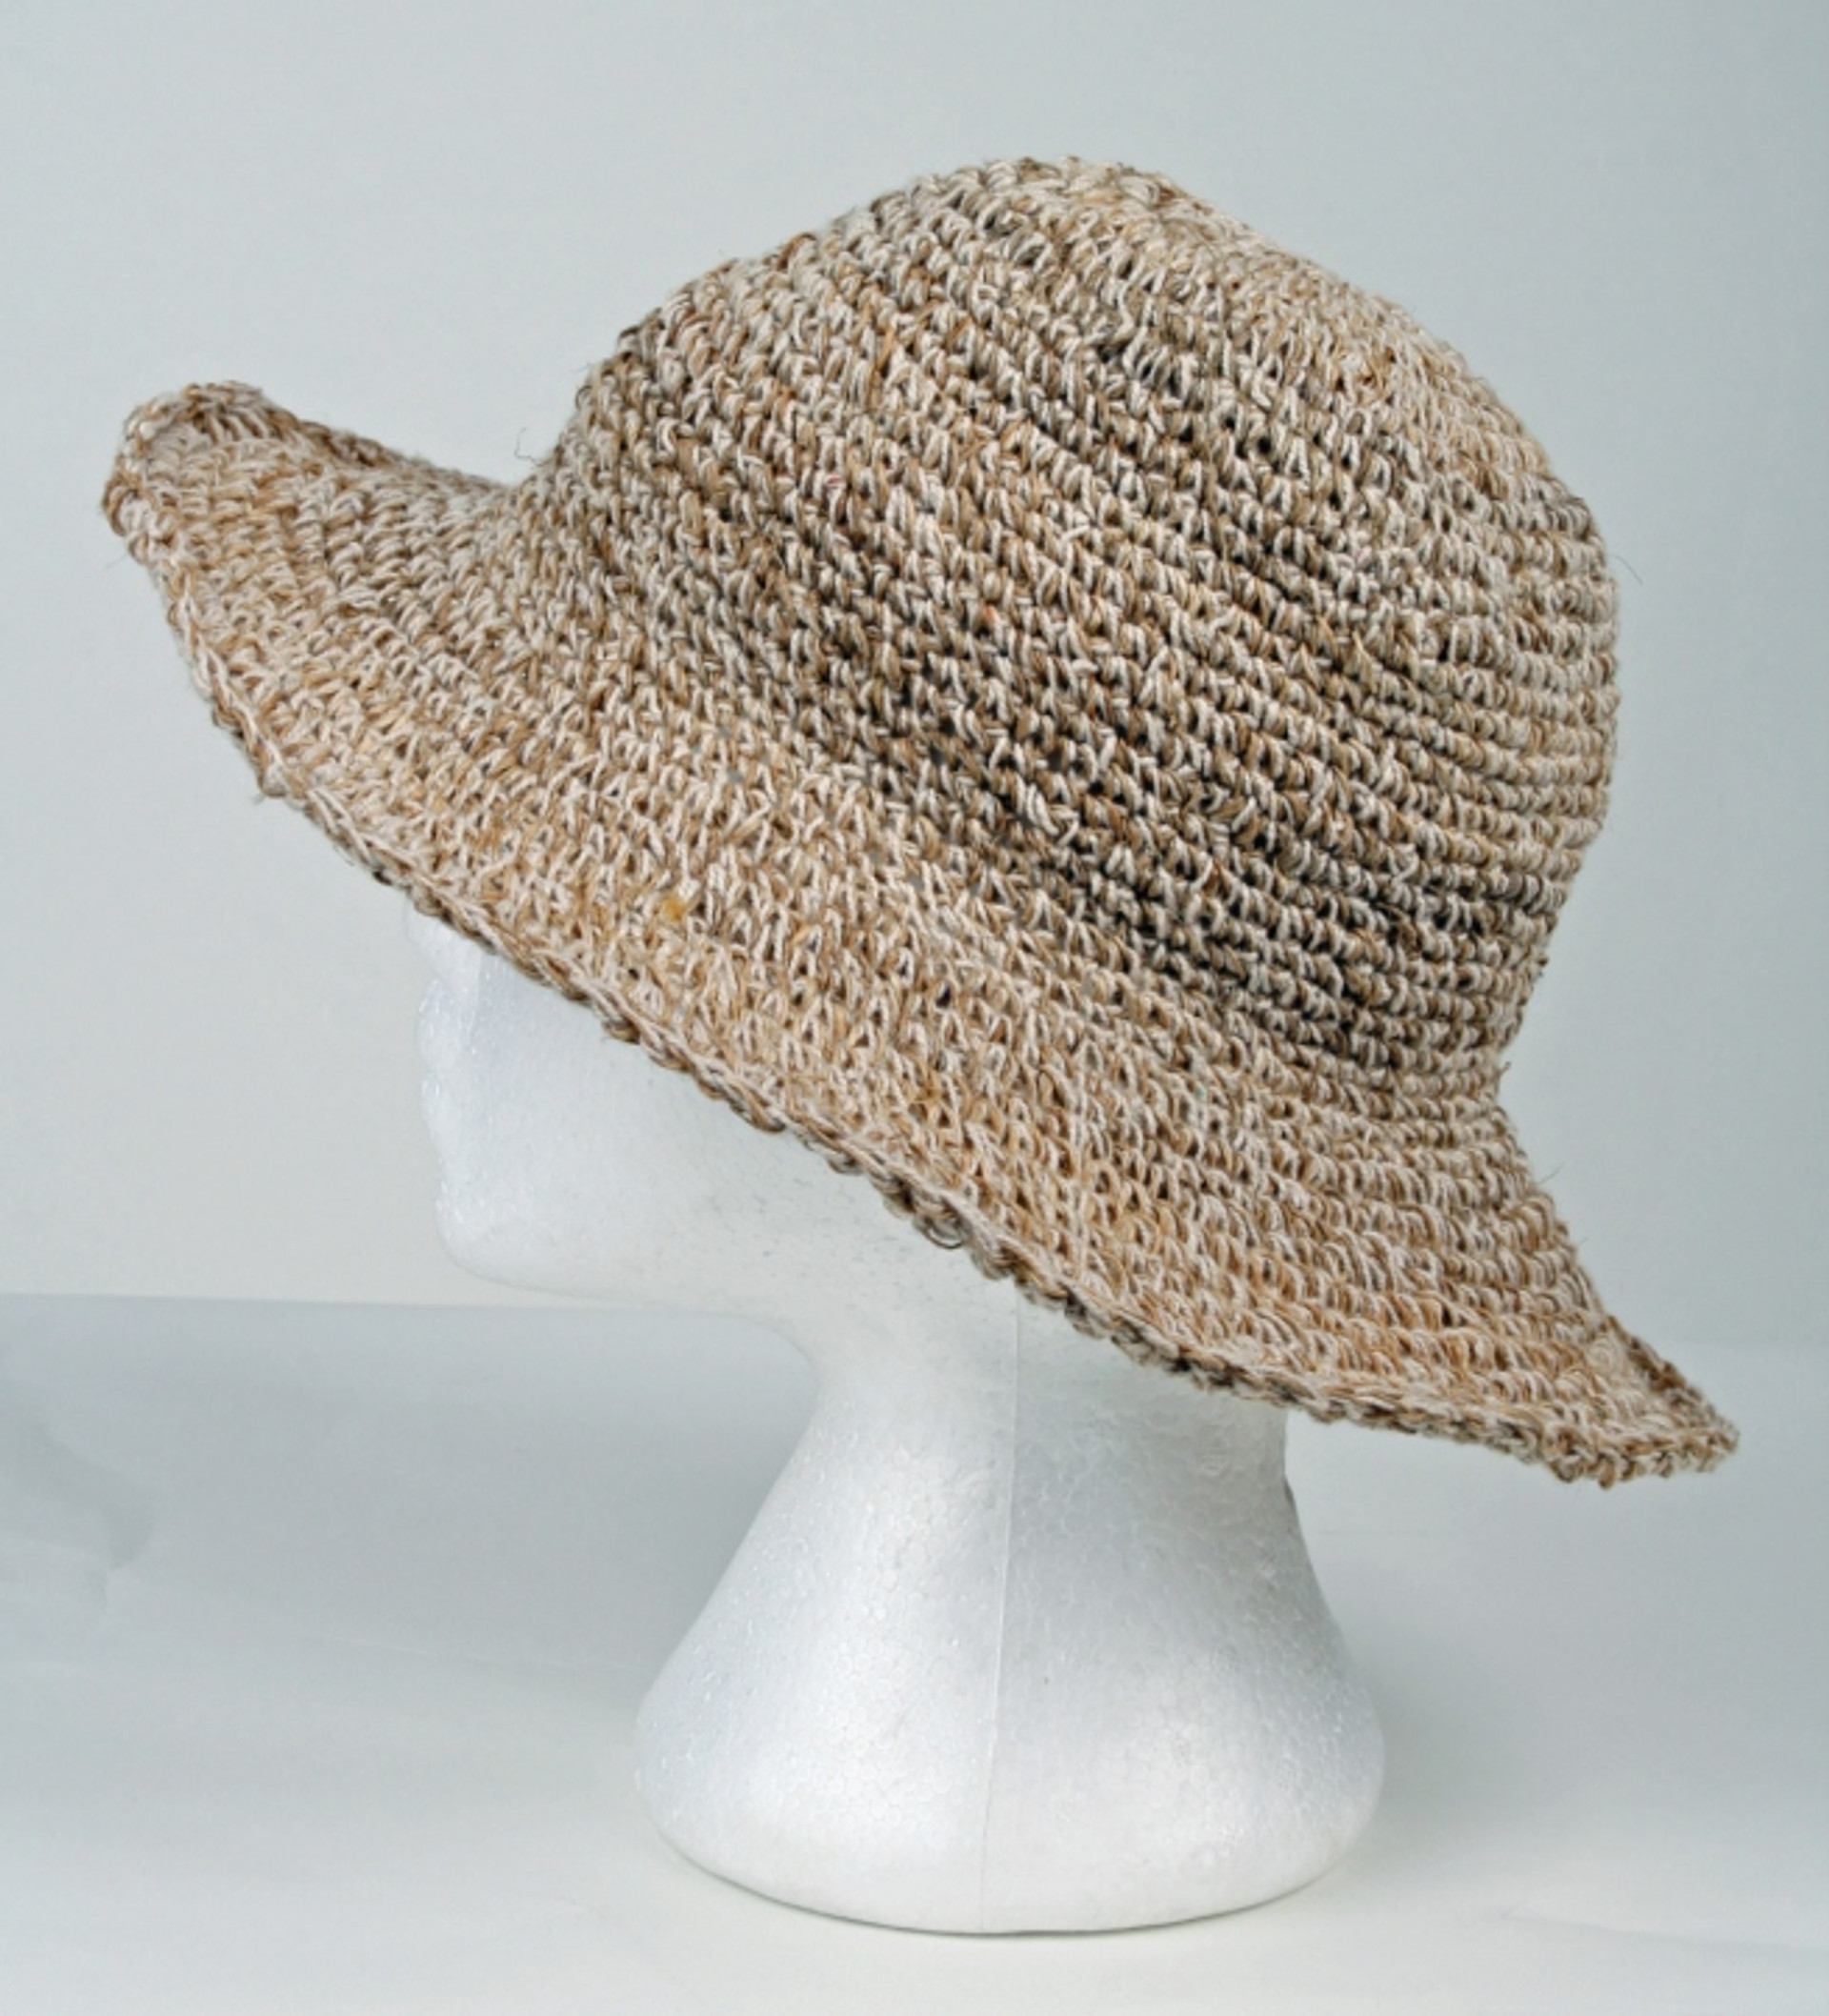 PHCS-N - Sun Hat with Secret Stash Pocket - As Shown - footpathtrading.com